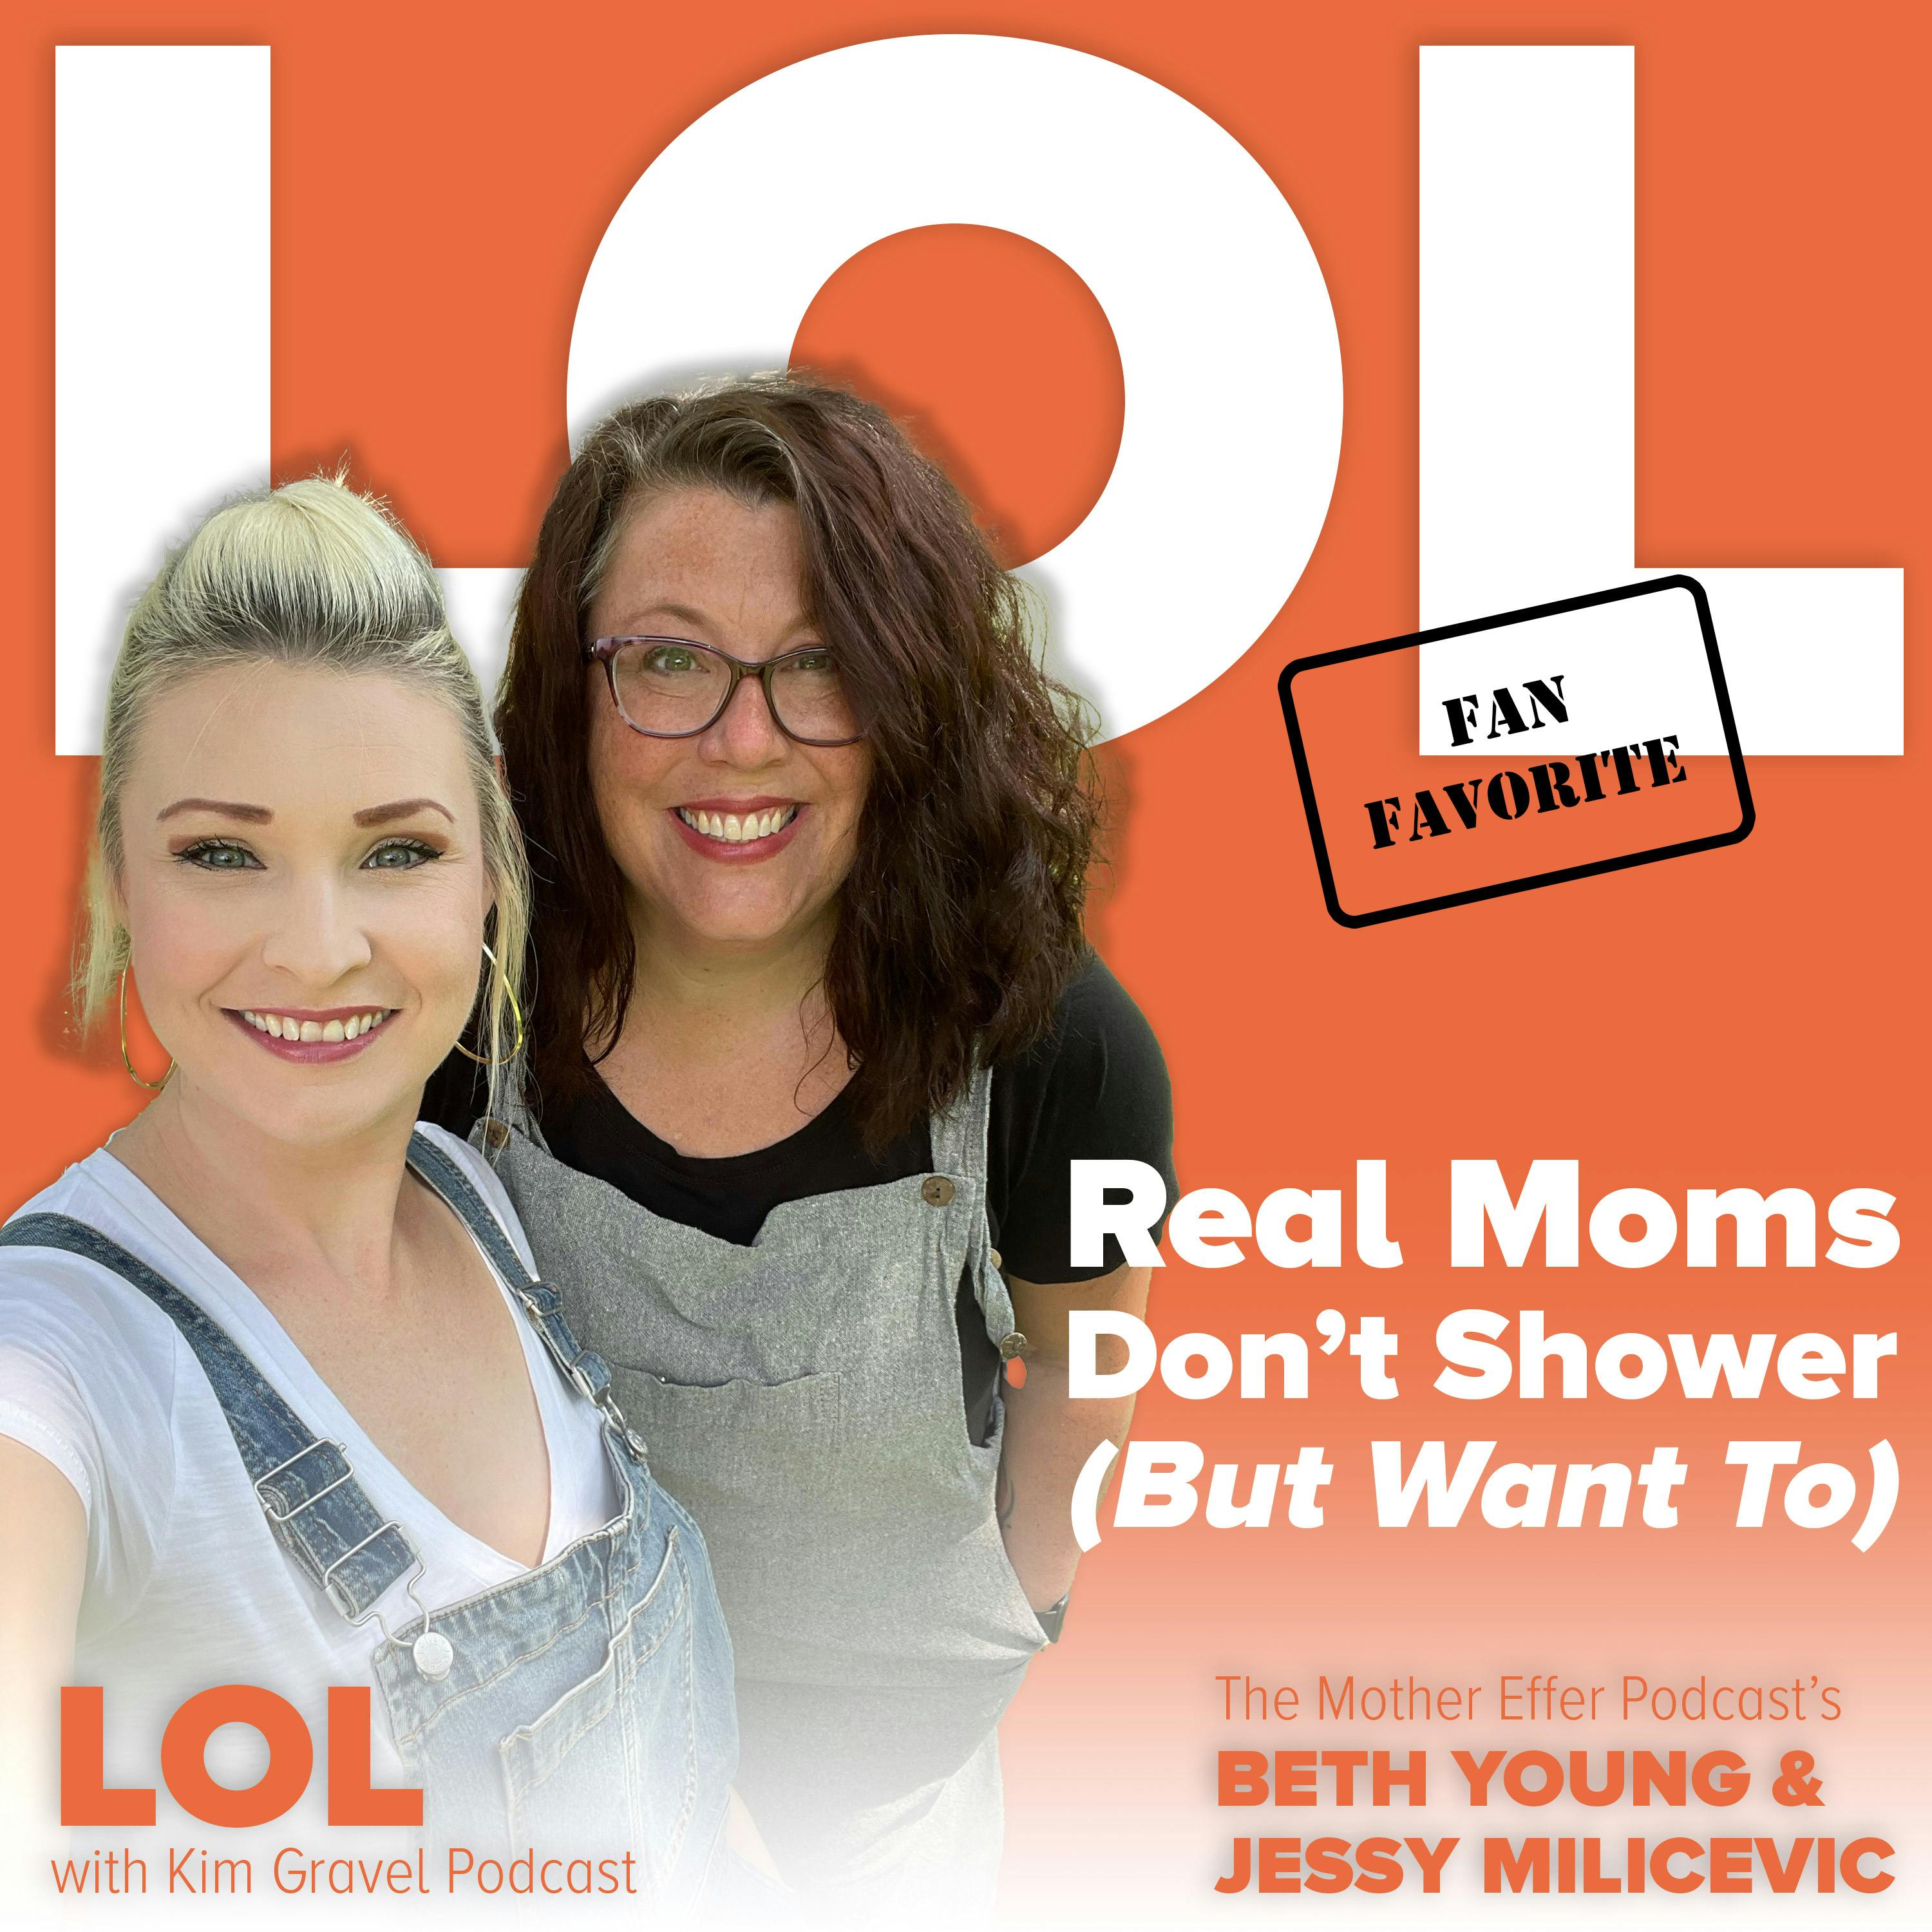 Fan Favorite: Real Moms Don’t Shower (But Want To) with Jessy and Beth